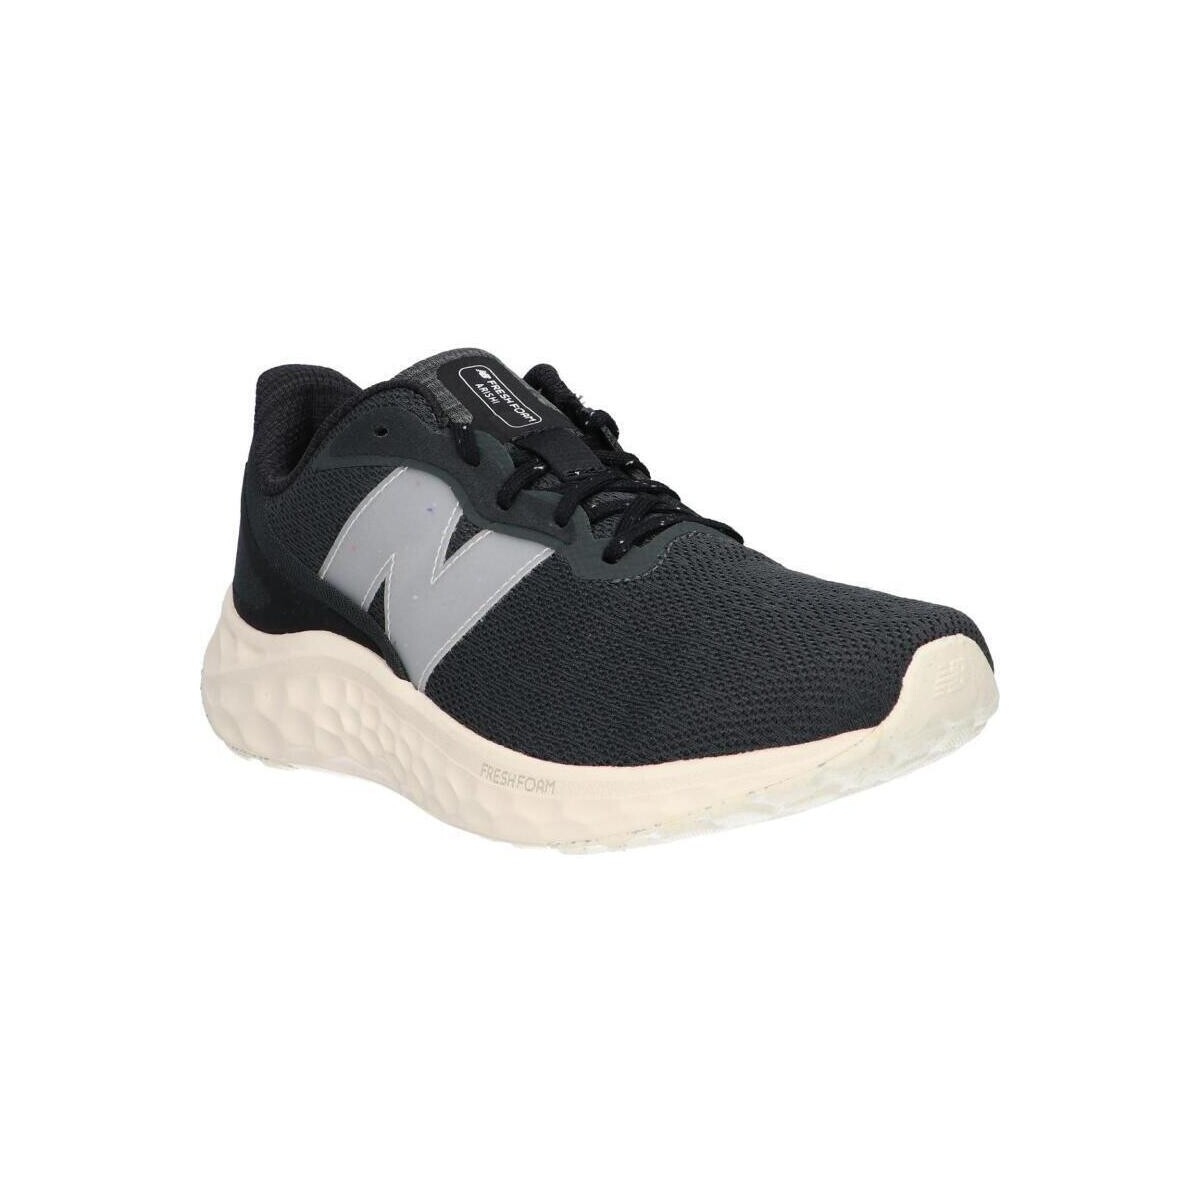 Chaussures Homme Multisport New Balance MARISFB4 FRESH FOAM ARISHI V4 MARISFB4 FRESH FOAM ARISHI V4 